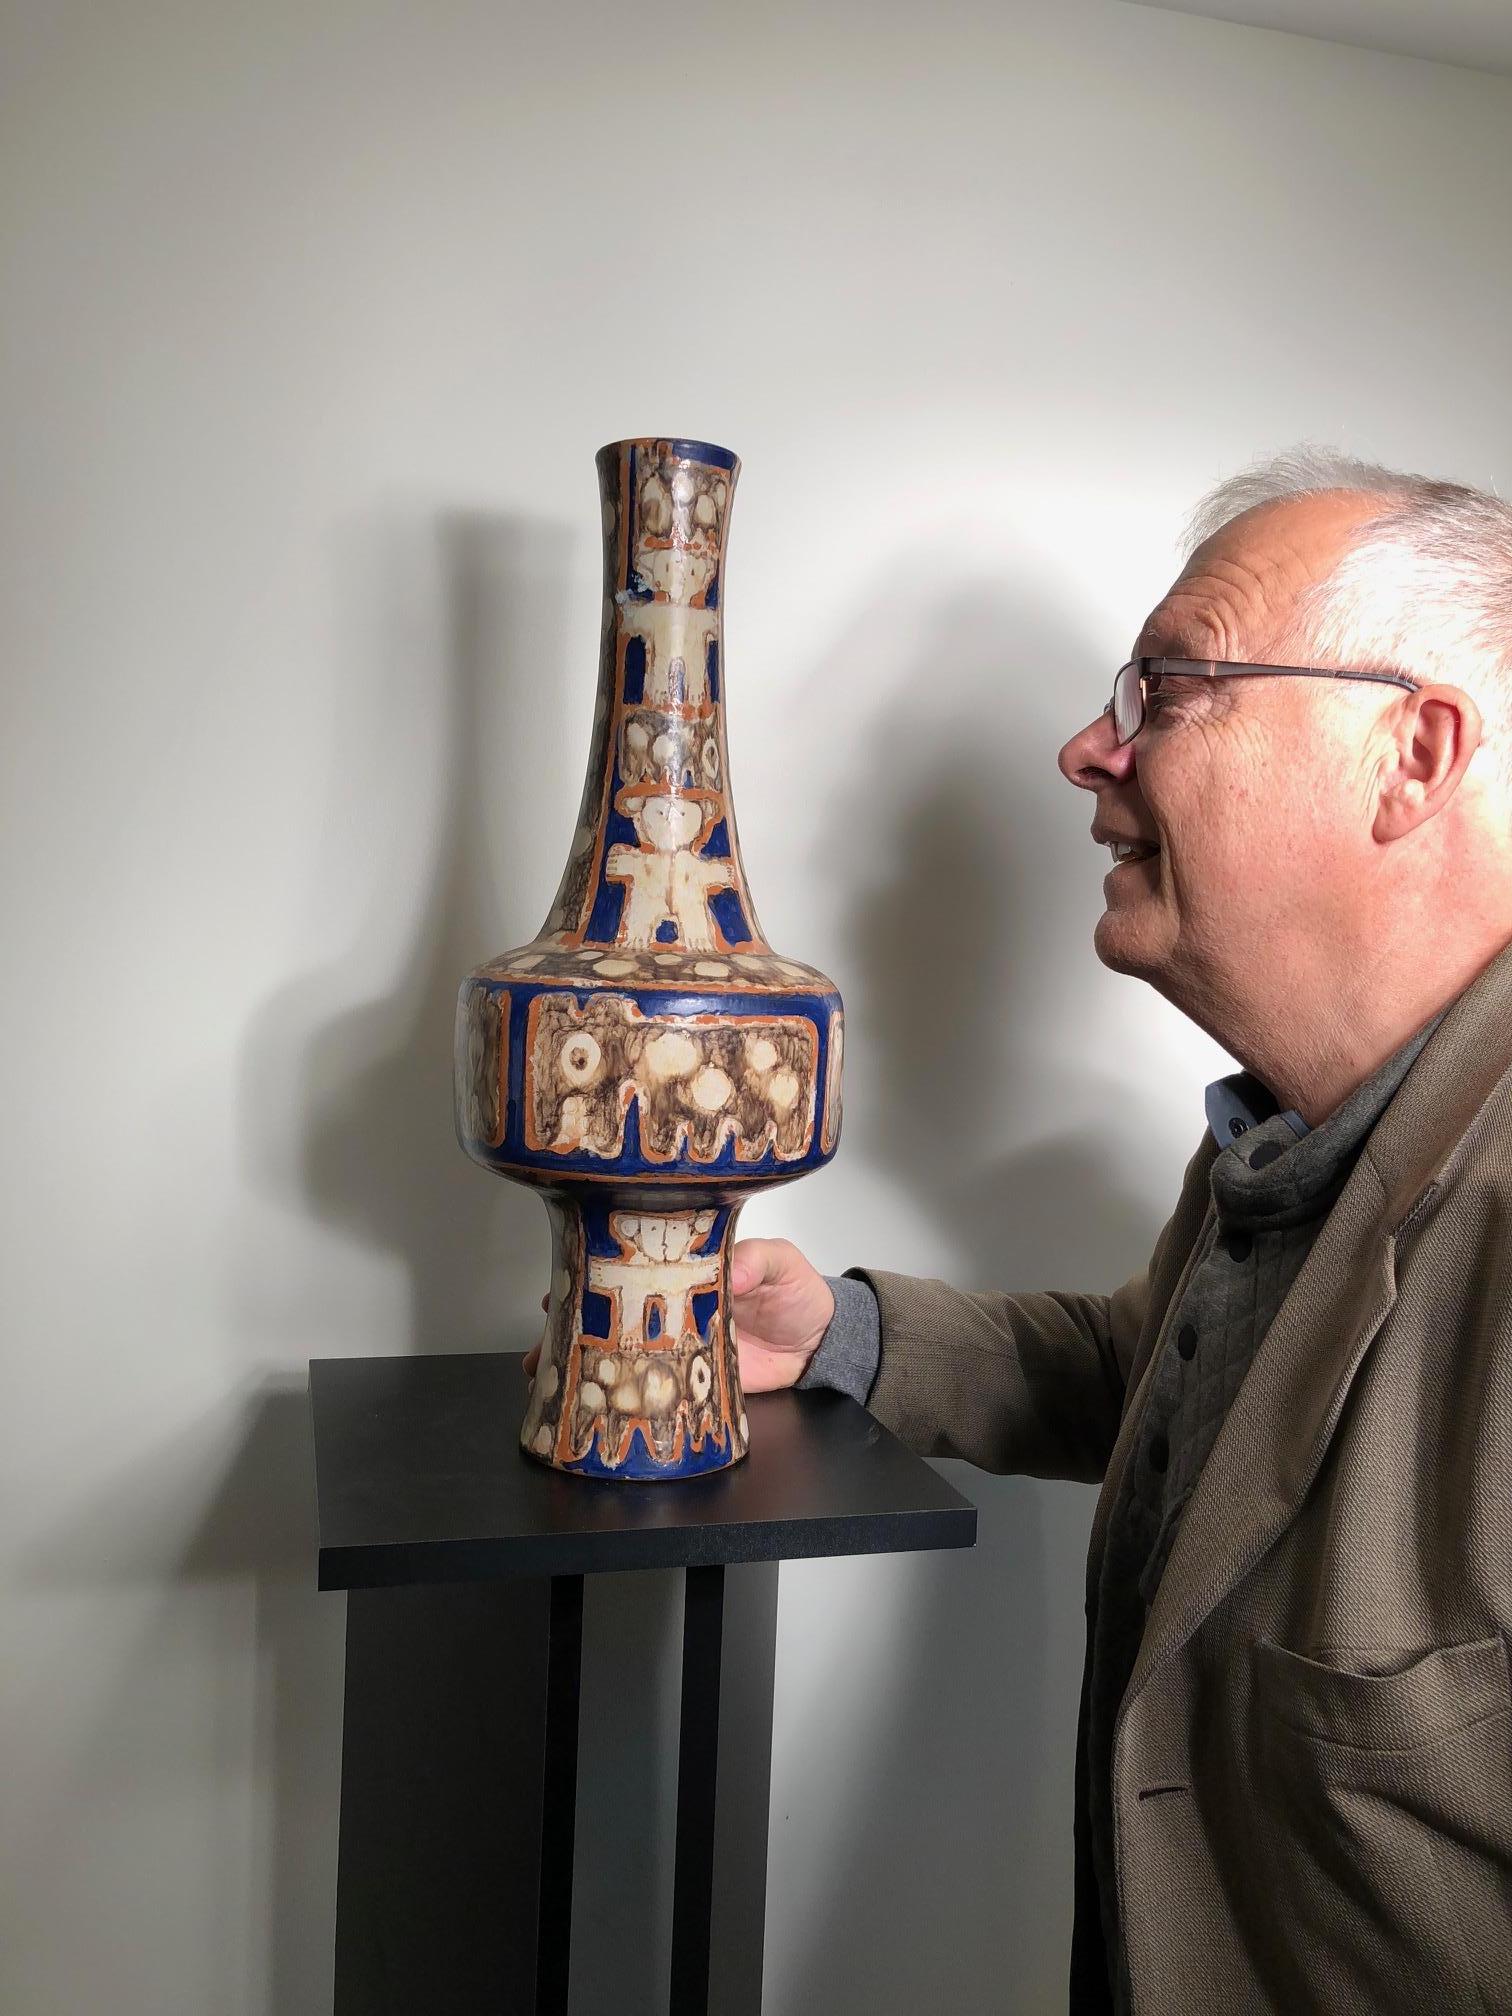 This is a wonderful handmade, hand-painted and hand glazed few- of- a- kind, mid-century modern ceramic creation of a tall classic footed bottle vase or possible lamp base by master designer Eva Fritz-Lindner (1933-2017) working near Karlsruhe some